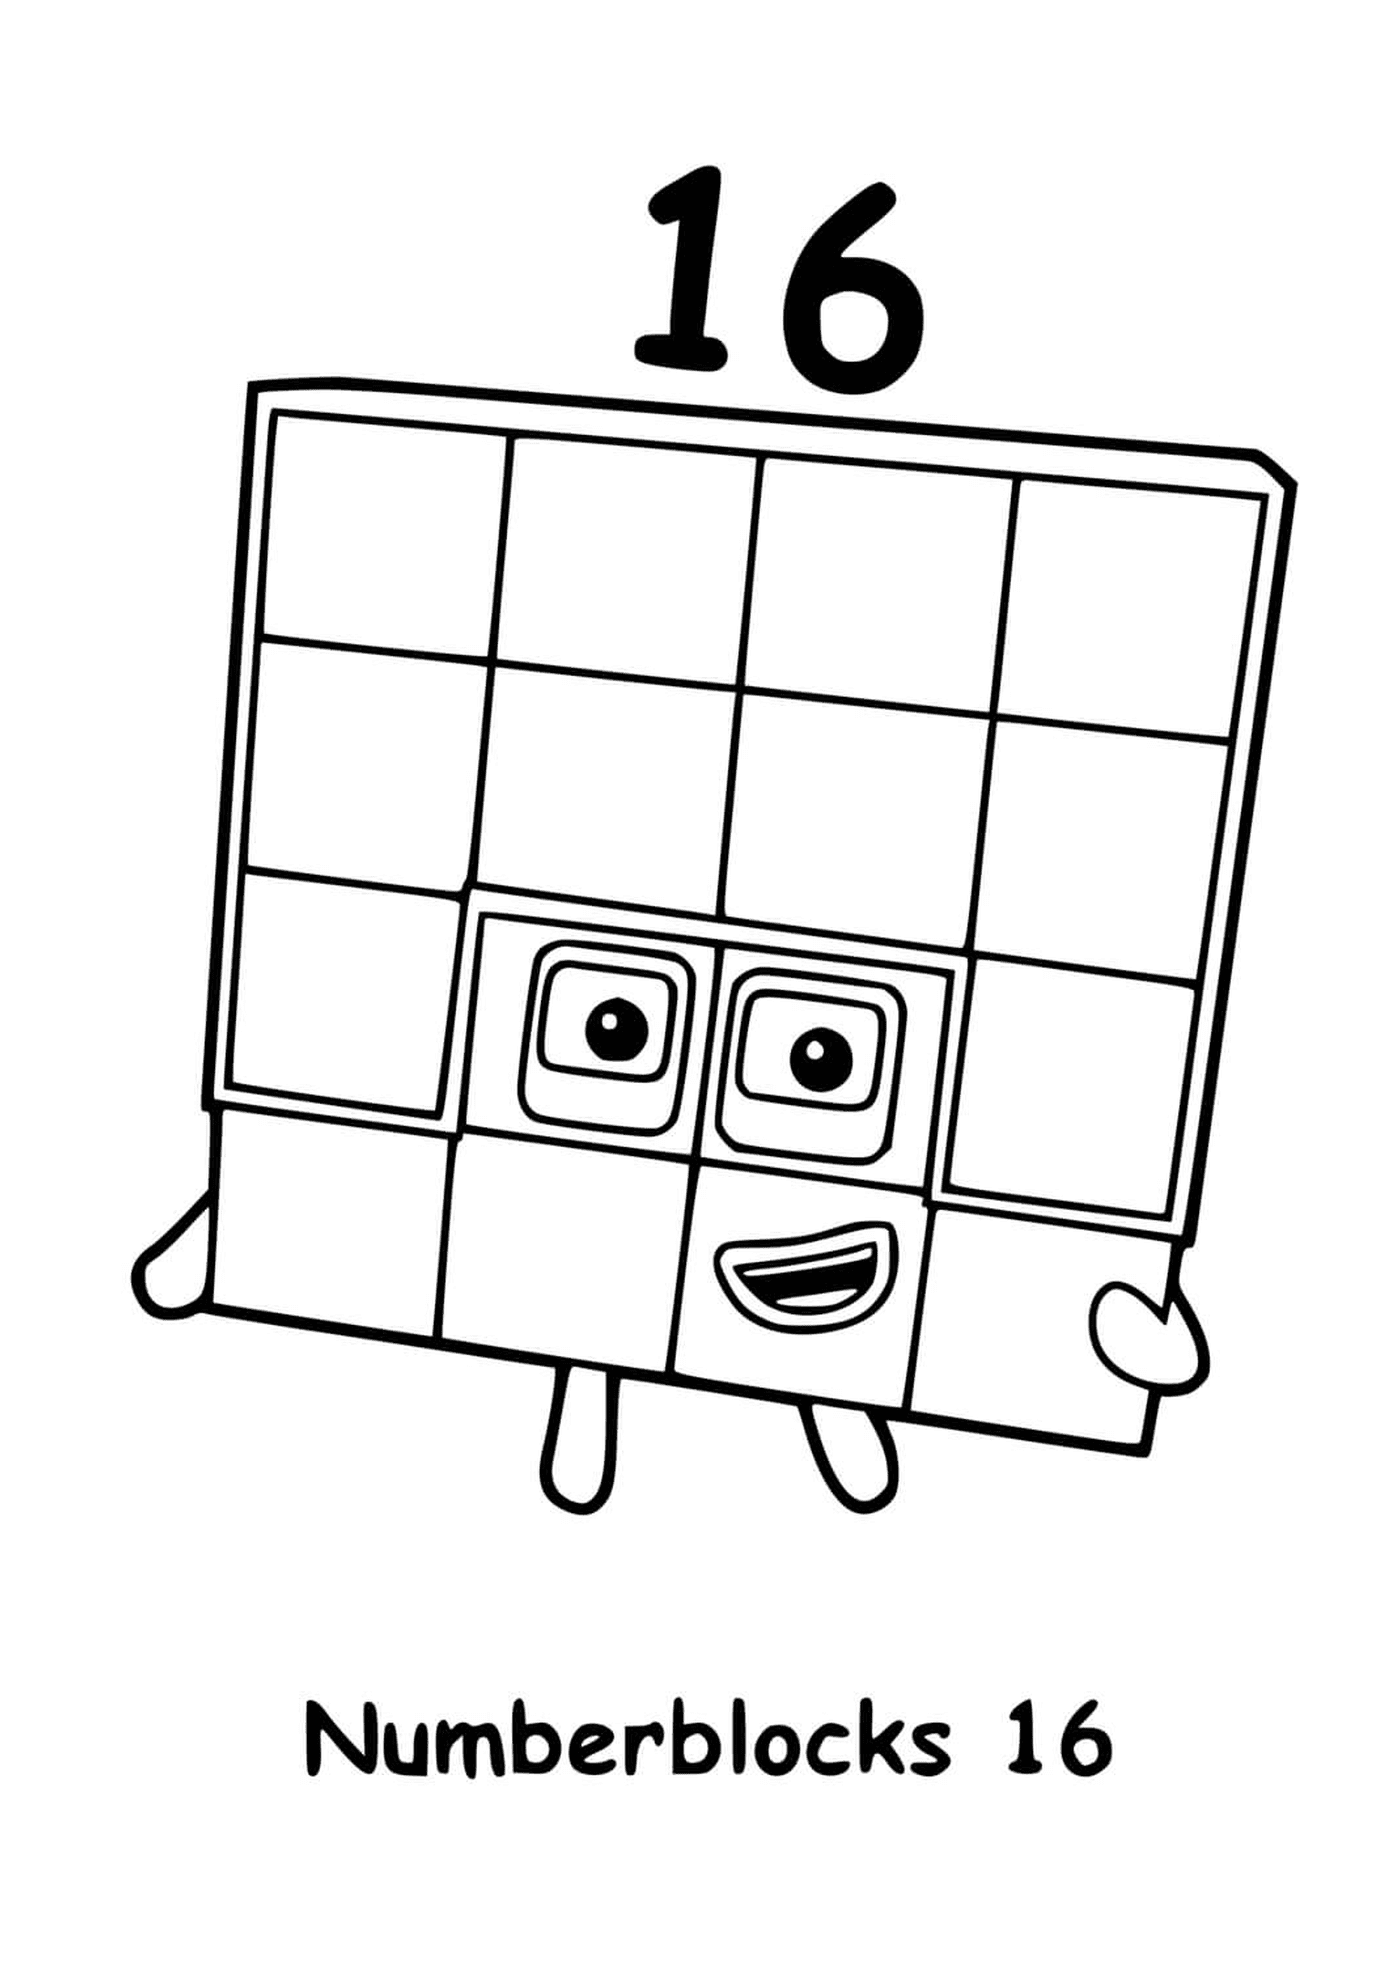  Numberblocks number 16, squared with squares 